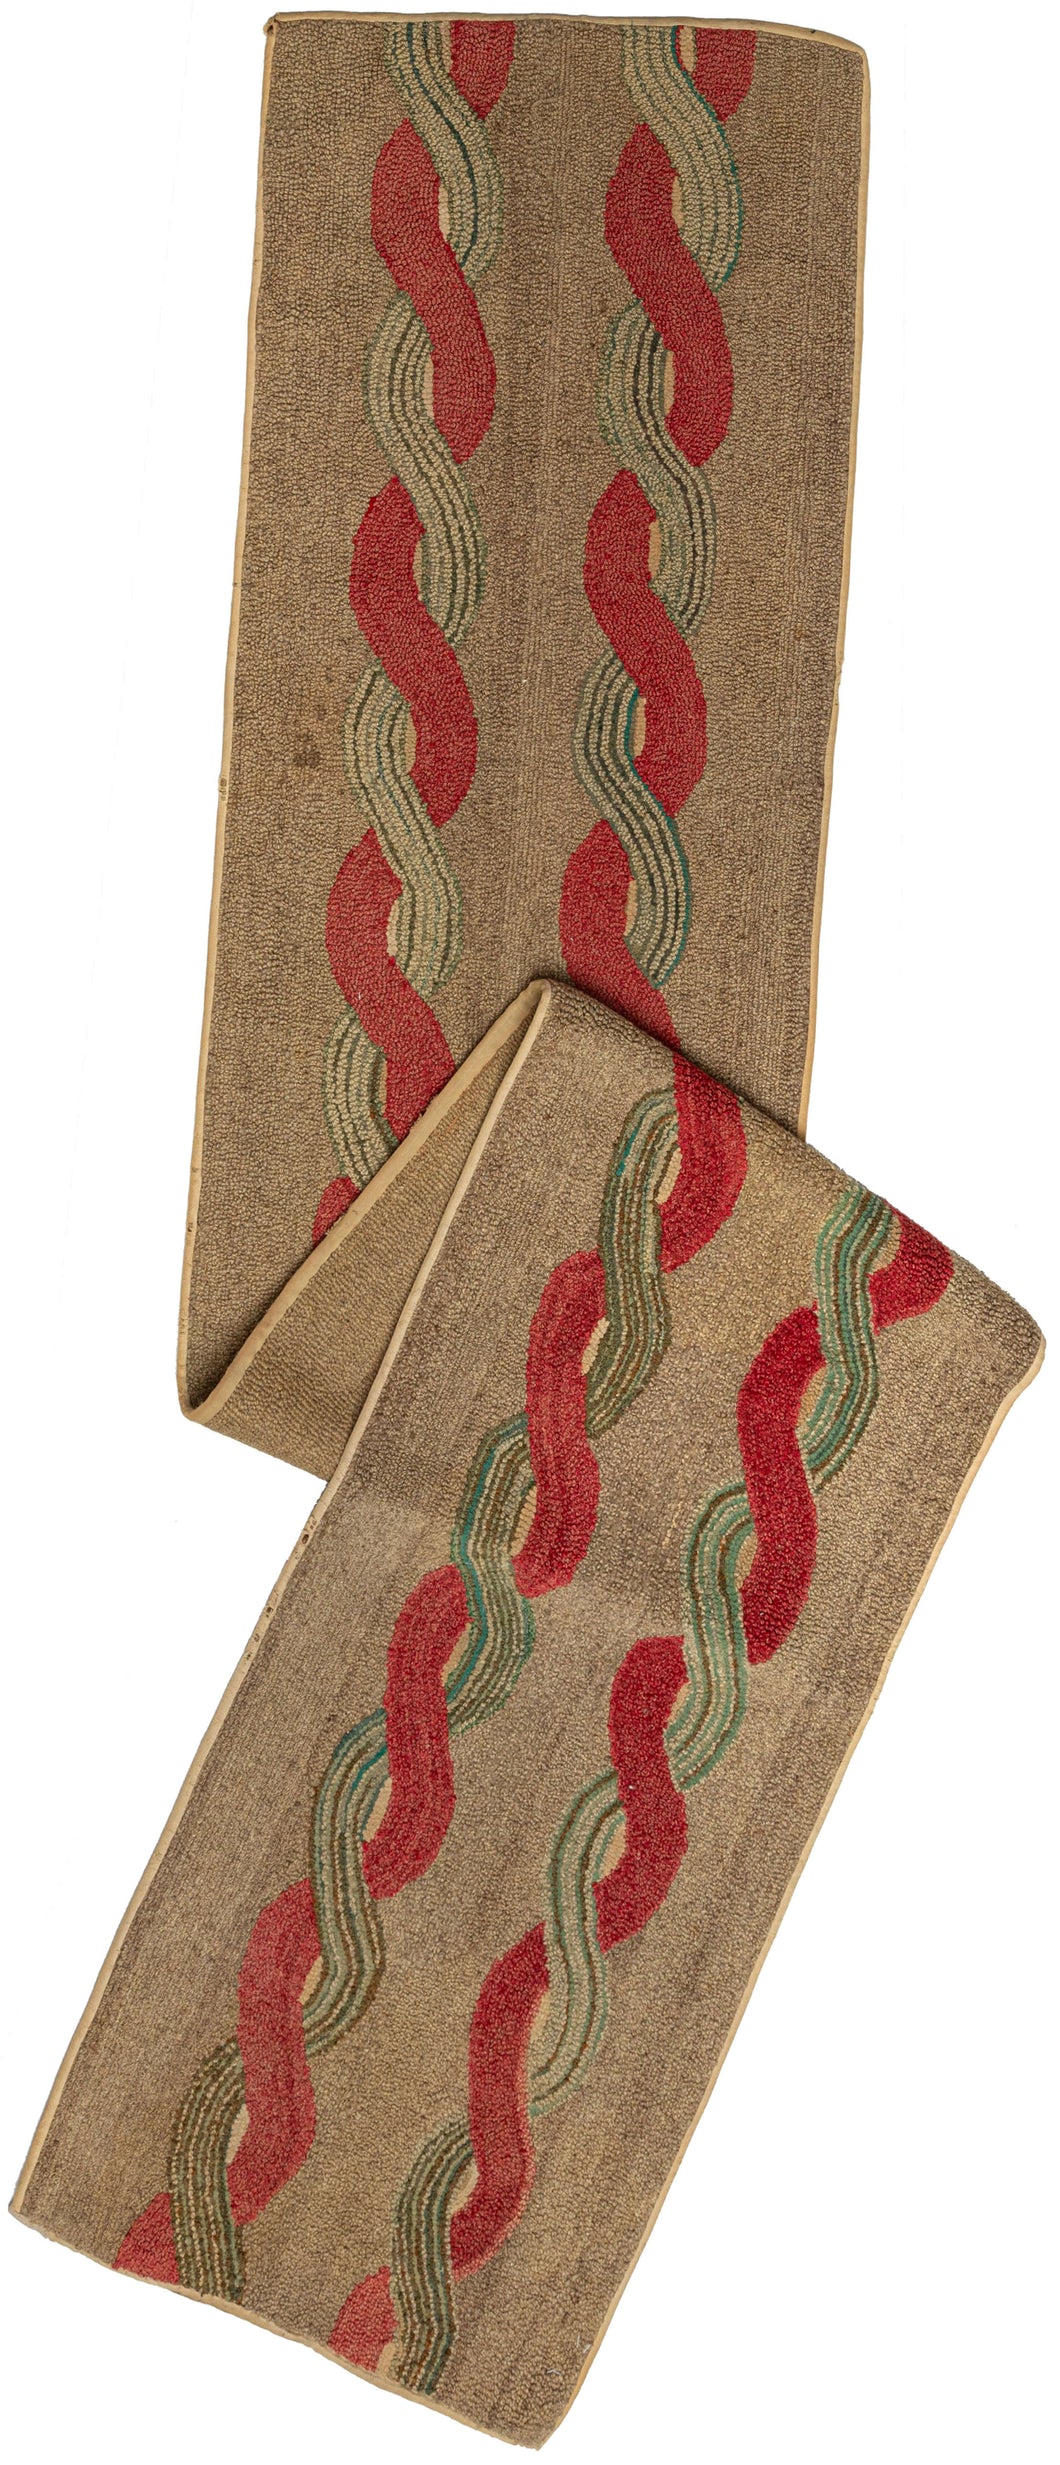 This Antique North American Hooked Runner features a straightforward but complex pattern of two interwoven scrolls on a camel ground. One scroll is a solid red and the other is striped green which accentuates the contrast and adds to the perceived dimensionality. The edges have been reinforced by thin beige binding.